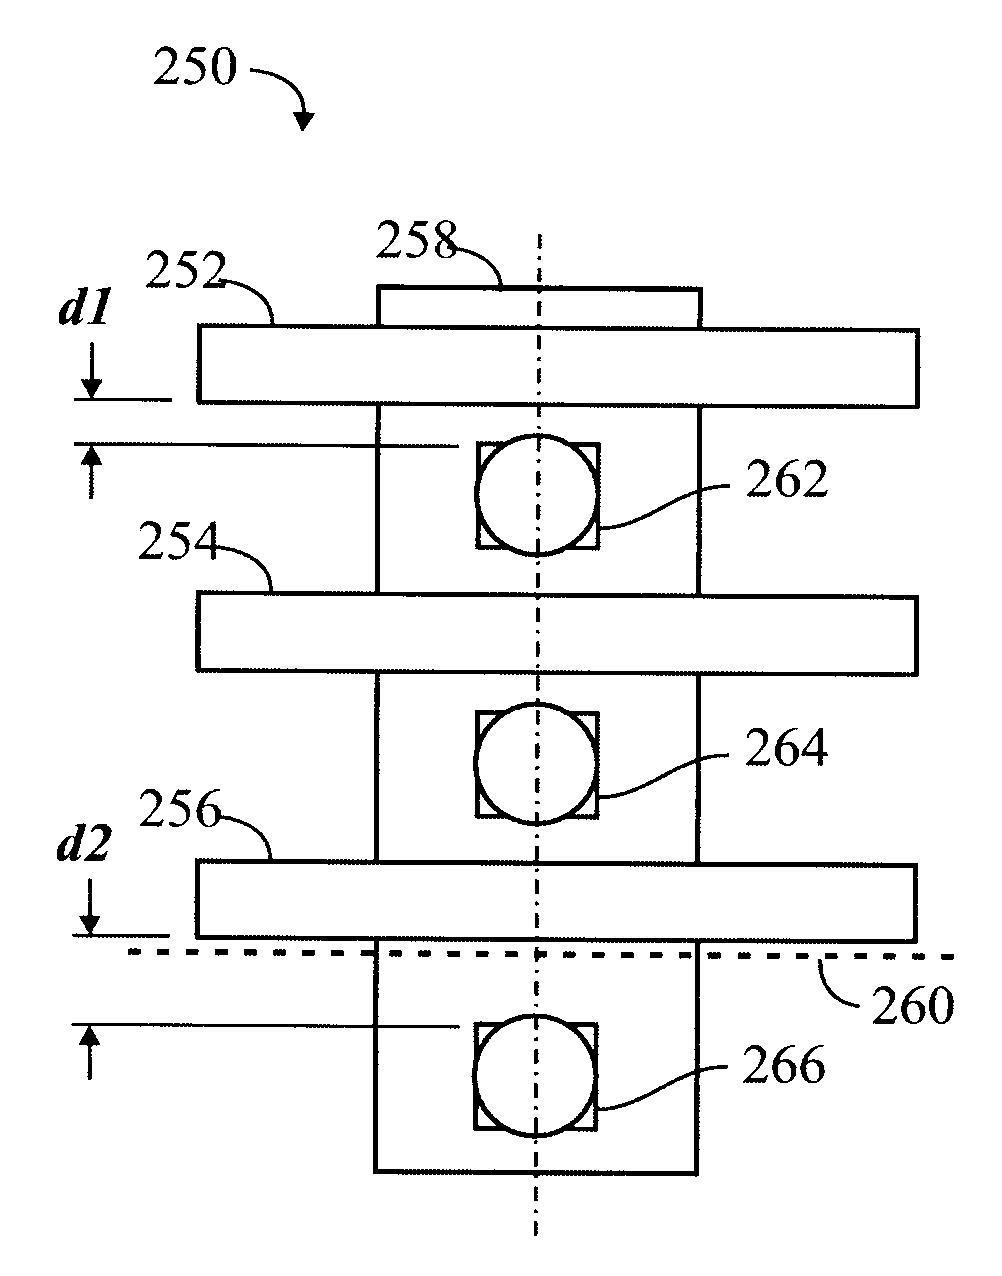 Placement and optimization of process dummy cells